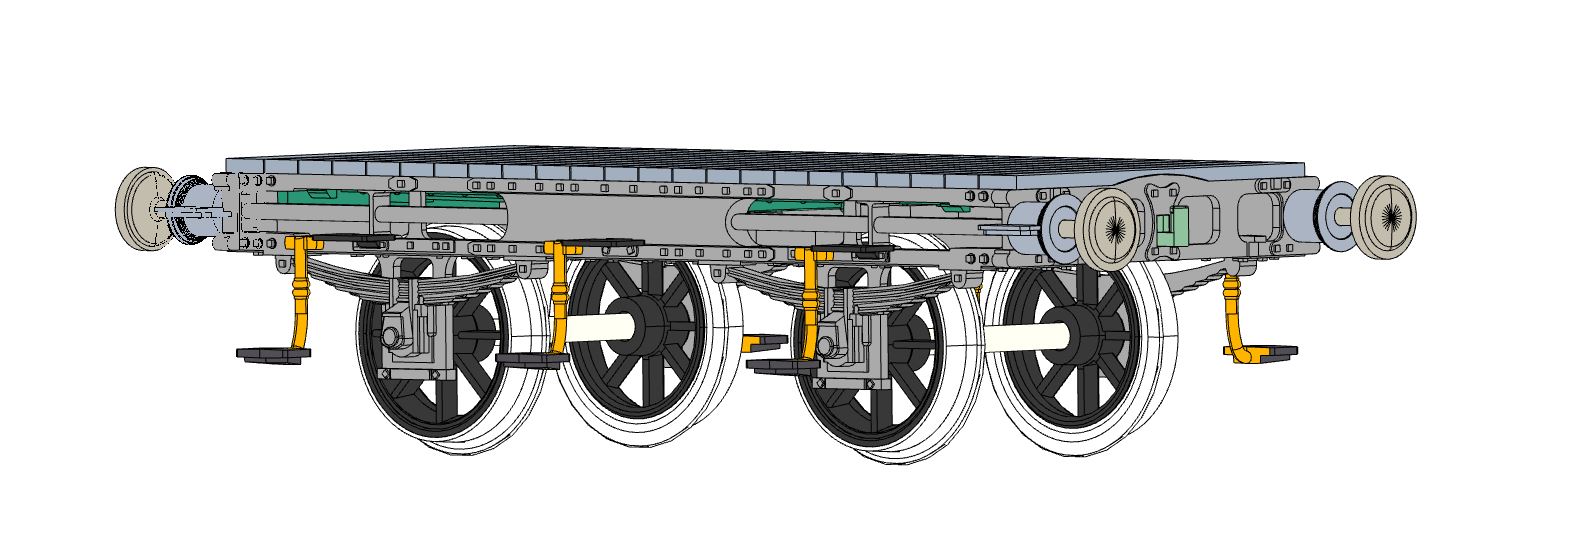 CAD data for the Era 1 flatbed wagon